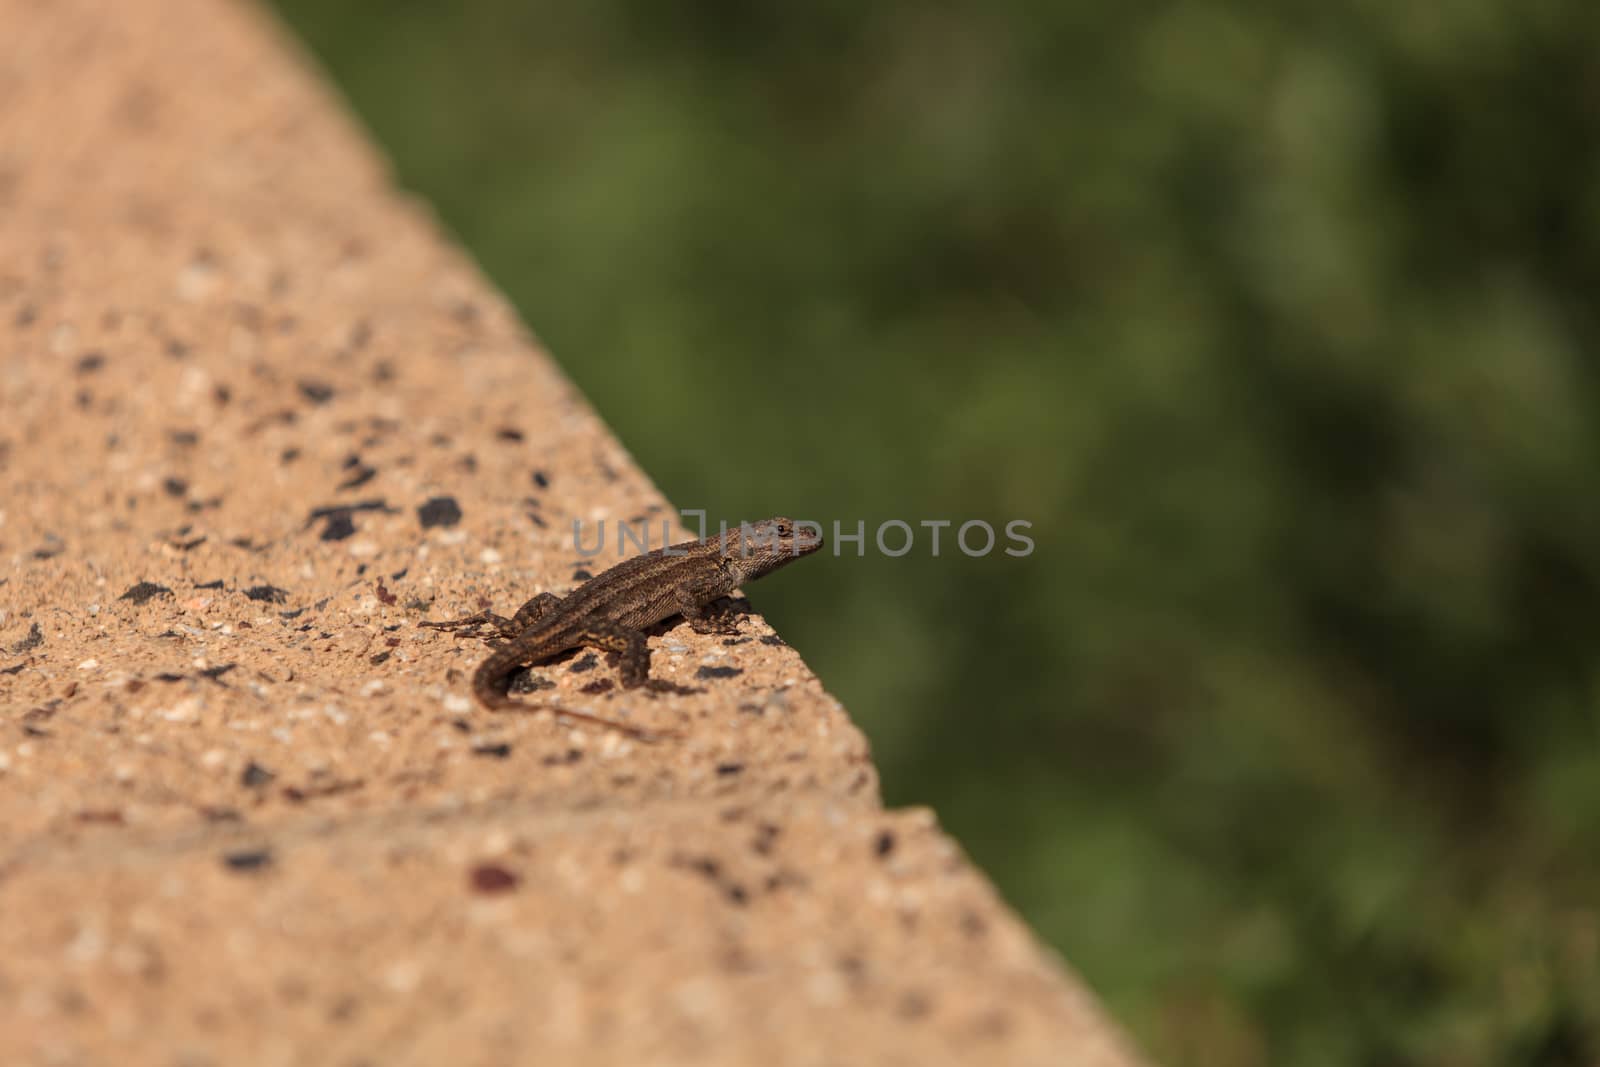 Brown common fence lizard, Sceloporus occidentalis, perches on a ledge with a green background.